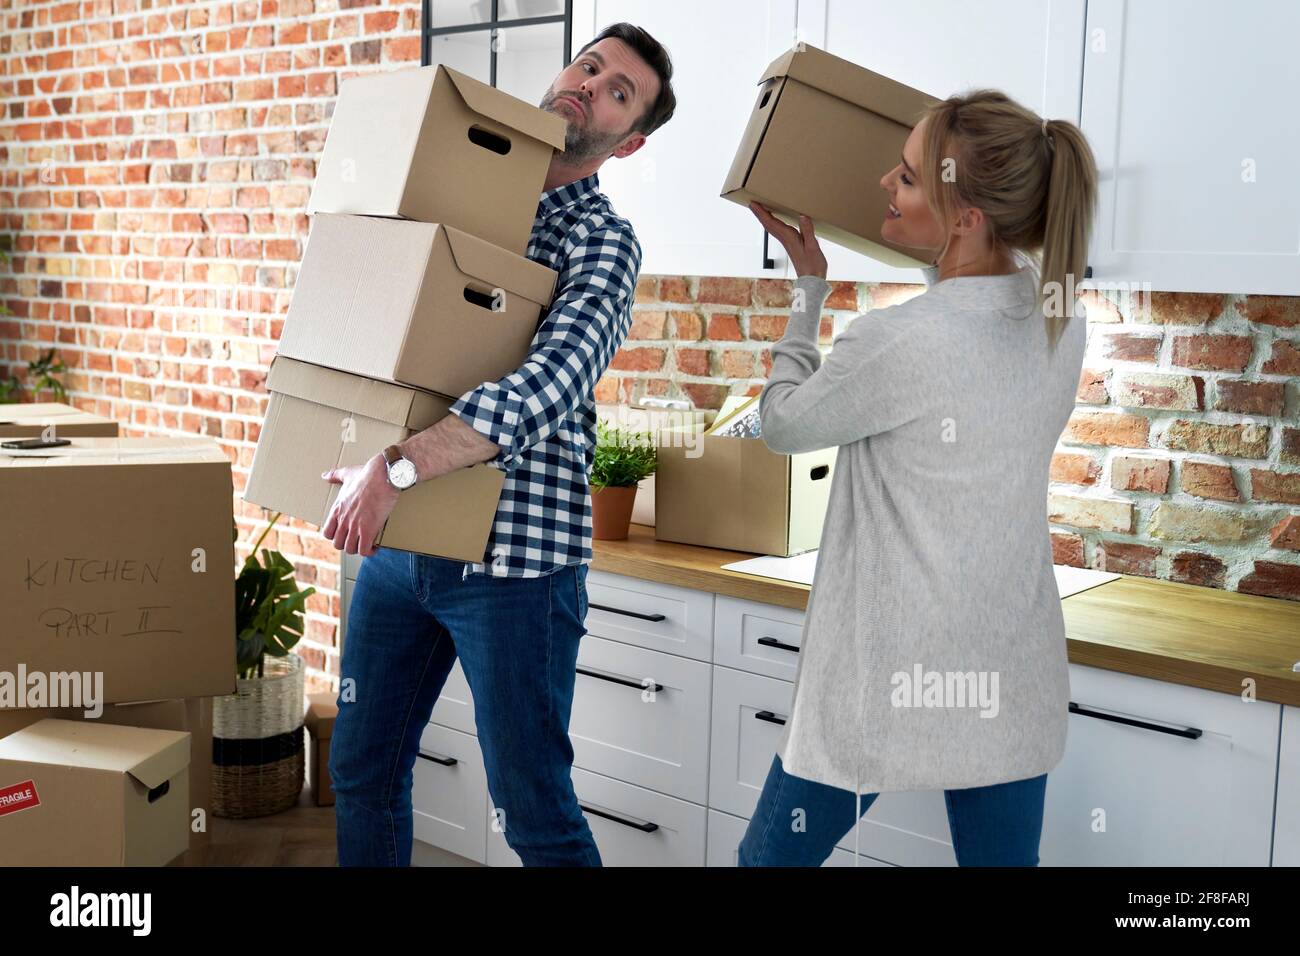 Couple during moving out takes cardboard boxes Stock Photo